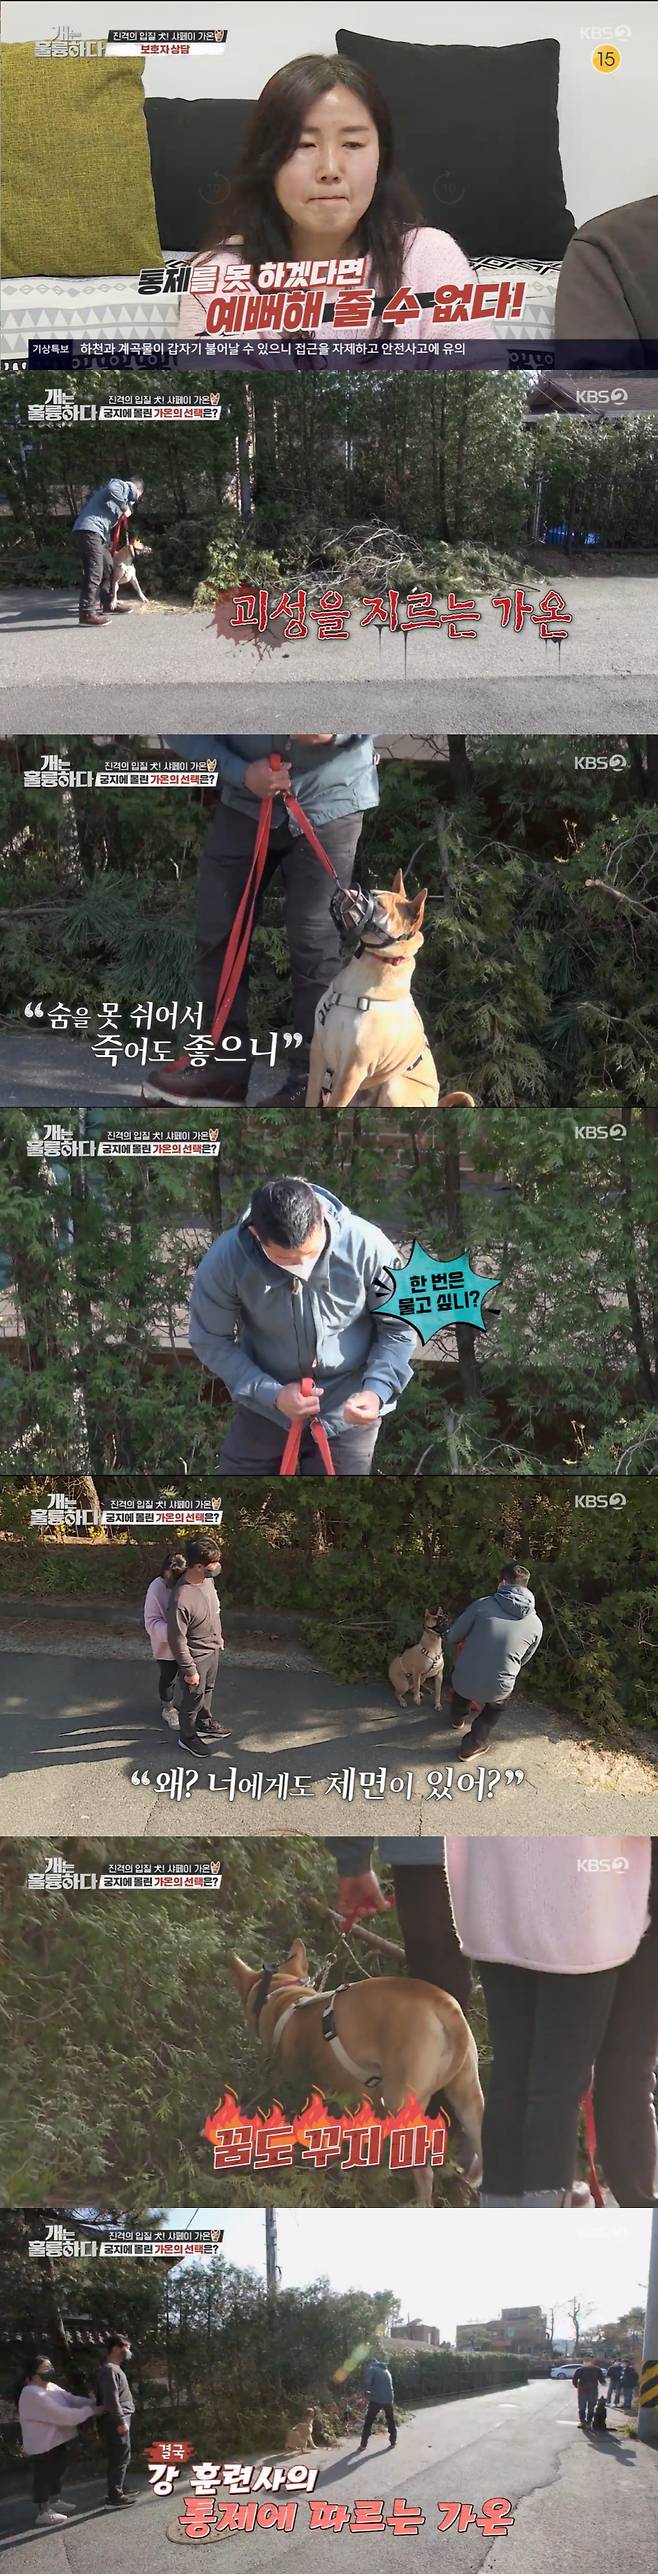 On KBS2s Dogs Are Incredible, which aired on the night of the 25th, the story of Shafei Supriya Pilgaonkar, an aggressive dog with strong barking and mouthing, was revealed.Kang Hyeong-wook explained, Shafei is more independent than other dogs, so there are many friends who act sensitively when Guardian tries to do what other dogs do not want.The Guardians said they lived in an apartment and moved to a power house for Supriya Pilgaonkar.Kang Hyeong-wook praised it as a really good job. Mom Guardian said, I quit the company.I wanted to take a walk because Supriya Pilgaonkar is at home alone every day, he said. I can do it for Supriya Pilgaonkar.Supriya Pilgaonkar seemed to have no big problem growing up with the great love of Guardians like this.However, as the neighbors and dogs passed through the wall, they could not stop the fierce barking with excitement.Supriya Pilgaonkar ran and barked until she was not seen in her own view, whether it was a person or a puppy.Neighbors said aggressive Supriya Pilgaonkar was nervous about the action and the neighborhood was loud.There was another problem for Supriya Pilgaonkar.Supriya Pilgaonkar showed extreme aggression to bite suddenly without stopping barking when the crew visited the filming car.My mother Guardian also said, My dad has seen it a few times, so I reached out and just asked, and then my father has been taking tranquilizers sometimes.The Guardians were sweating and sweating because they were running toward passersby even when Supriya Pilgaonkar took a walk.When I go out for a walk, I only go on a path without people, said my mother Guardian.Ive also sent a few training camps, but I asked another dog, and since then I dont let another dog meet at all, her husband Guardian said.The Guardians said, Let them all go. Why do you raise such a dog? Euthanasia. I do not think I should raise it.I heard a few times that I should deal with it before I get rid of others. His wife, Guardian, said, After being bitten at the end, I told my husband that I could not do it anymore. But after a day, I seemed crazy.I still have more to do, so I applied here. Sometimes Im afraid that I can not touch my hands, but I still want to live with you.Lee Kyong-kyu and Jang Doyeon visited the Supriya Pilgaonkars house and barked strongly as soon as they rang the doorbell.Wife Guardian warned the pair: Be careful with your hands and never touch them, the pair approached slowly, covering their hands as much as possible.I jump and I climb people and bite them, Ive been bitten by my arm, her husband Guardian said.Supriya Pilgaonkar briefly rushed to Lee Kyung-kyu while the Guardian loosely held the line to tie it.Lee Kyoung-kyu and Jang Doyeon avoided back in surpriseKang Hyeong-wook saw Supriya Pilgaonkar, who kept barking away from the Guardian, and decided, He does not want to protect the Guardian or bark with the courage of the Guardian.Supriya Pilgaonkar kept barking at the two even after the Guardian was gone, barking even worse without eating the snacks Lee Kyong-kyu had thrown at.It was similar to the Doberman Bianca (appearing 85 times), which I had previously met, Lee Kyung-kyu said.There is no downfall without a master, I am excited without notice, I never look at it and look at it all the way.Kang Hyeong-wook pointed out, It is also a problem that those Guardians do not know how to control dogs.Kang Hyeong-wook pointed out why he uses a chest line instead of a neckline, saying, The chest line is easy for dogs and it will not be easy to control.The Guardians said, Nowadays, it is okay with the breastline. Then Kang Hyung-wook said, Well, thank you, I am so much.Kang Hyeong-wook said, If control is easy, there is nothing I can do. Kang was angry at the Guardians who knew there was a problem but only excused them.You met Supriya Pilgaonkar because it was hard to raise. You considered euthanasia. Then it is an individual who can not control himself.You dont know when youre going to turn around. Youre already bitten a lot.It is safe to use a neckline or a tool to make sure that you have more control in situations where you have to be careful, he said.He said he needed to advise replacing control tools and improve the Guardians attitudes, as his wife, Guardian, who brought him a leash, said: To fill the semi-choke chain?I laughed as if it were ridiculous.The river trainer said, I did not want to fill (the anti-choke chain) with Wenman.How sick were the physical people, Supriya Pilgaonkar pointed out to the Guardian, because my neck hurts.I did not do much I do not want to do, so I do not have sociality. In order to raise sociality, I have to control my tears firmly in my heart, he said.Kang Hyeong-wook advised, If you want to be pretty, you have to control it. If you can not control it, you can not be pretty.Subsequently, training for taking the initiative with Supriya Pilgaonkar was started.The river trainer said, Now he seems to be everyday to listen to the Guardian instructions, and the Guardian admitted, It was like listening once in 10.The river trainer said that if he wanted to take the lead in the walk, he had to bring it by force when he did not listen, and his mother Guardian grabbed his heart and dragged Supriya Pilgaonkar.I did not bring the Guardian to go here, but I will feel guilty. The guilt must be overcome by the Guardian.I cant help you, he said.Supriya Pilgaonkar kept trying to go in a direction other than the direction the owner was going.However, after several repeated training sessions, Supriya Pilgaonkar succeeded in taking a walk under the leadership of the Guardian.The instructor advised me to praise him with words instead of praise for his skinship.Second, we started aggressive control training.Lee Kyoung-kyu and Jang Doyeon appeared as outsiders, and Supriya Pilgaonkar showed aggression immediately after encountering the two.But after the control training, he succeeded in walking safely with Supriya Pilgaonkar in front of the outsider.Next, with Helperdog, aggressive control training was followed.Supriya Pilgaonkar struggled with a distressing screech as she went out on the road, and the Guardians were sorry.The river trainer said: Supriya Pilgaonkar will be Choices, pain when strangled, and a desire to run into that dog. Of two, Choices.If you can not breathe and you want to hurt, you will not stop, and if you want to breathe, you will not run. Superiya Pilgaonkar was strongly repulsed by the river trainer, and the river trainer was tense, pulling the strings strongly.Eventually, Supriya Pilgaonkar followed the control of the river trainer.Kang Hyeong-wook took Supriya Pilgaonkar and passed the helper dog, and Supriya Pilgaonkar passed slowly through Helperdog.Superiya Pilgaonkar praised Choices for being controlled over bites; Kang Hyeong-wook praised that Choices are right; they did well.However, Supriya Pilgaonkar has been repulsing in training with Helperdog, and Kang Hyeong-wook controls Supriya Pilgaonkar and says, It is simple.If you jump, you have a price. If you want to bite him, you can bite him. Understand. If you dont understand, every day will be the same day. Kang Hyeong-wook told the Guardian, Looks at Supriya Pilgaonkar is a real strong dog, and when you run, you bite your chest, not your feet.The frightened children bite under; Superiya Pilgaonkar is never a weak dog, so Guardian should be more strong, he advised.Kang Hyeong-wook saw the possibility of Supriya Pilgaonkar after repeated training and praised both Supriya Pilgaonkar and Guardian, saying, It seems to be.Even in the video of the Guardians, Superiya Pilgaonkar was seen walking steadily without barking under Guardian control.